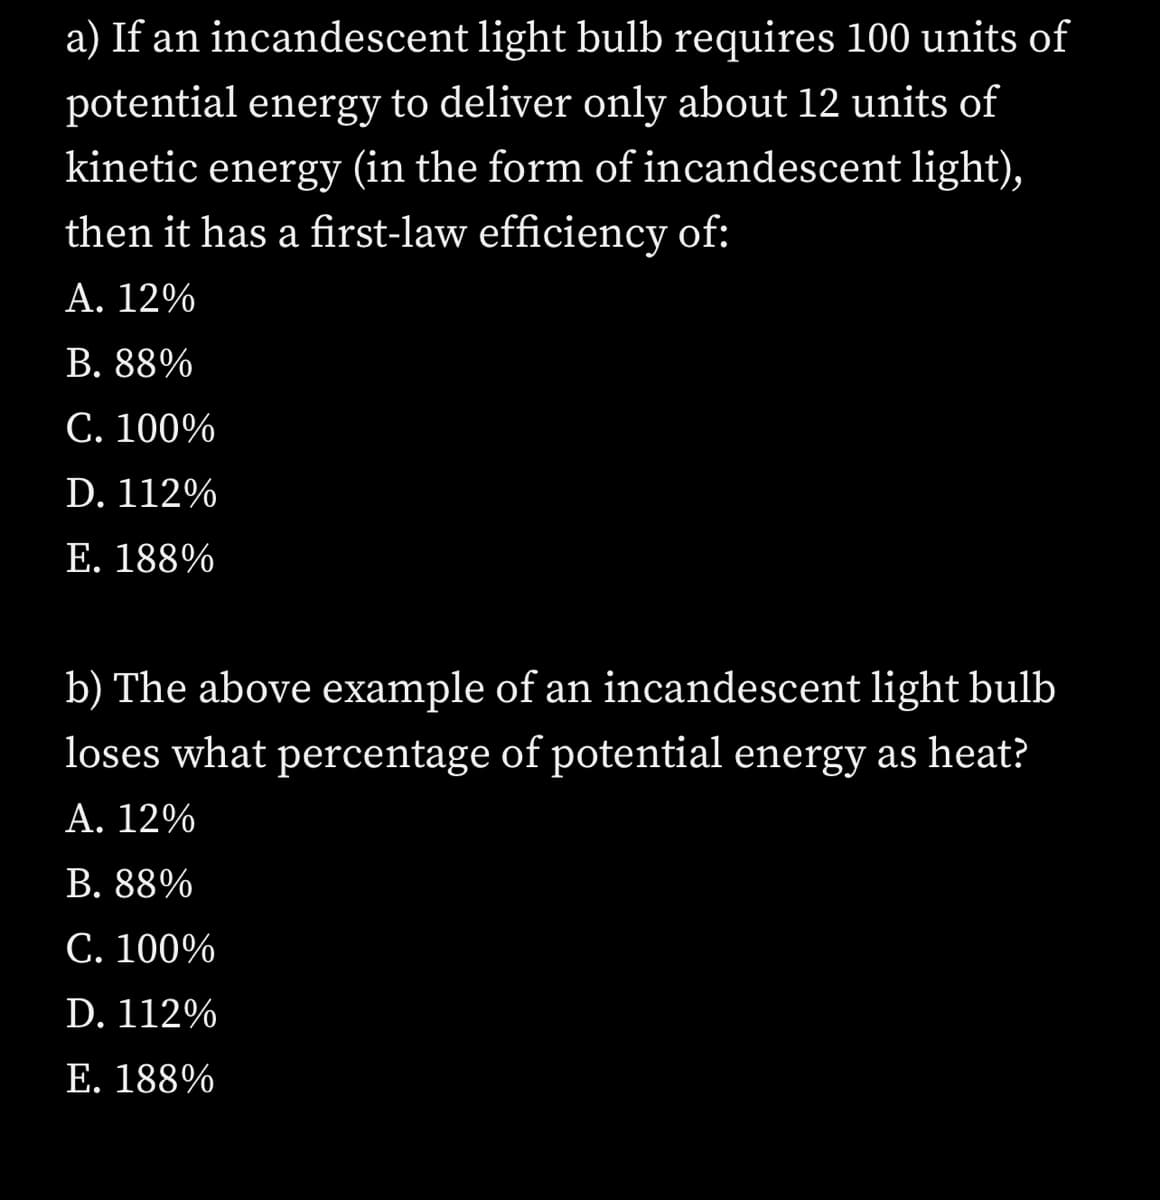 a) If an incandescent light bulb requires 100 units of
potential energy to deliver only about 12 units of
kinetic energy (in the form of incandescent light),
then it has a first-law efficiency of:
А. 12%
В. 88%
C. 100%
D. 112%
E. 188%
b) The above example of an incandescent light bulb
loses what percentage of potential energy as heat?
А. 12%
В. 88%
С. 100%
D. 112%
E. 188%
